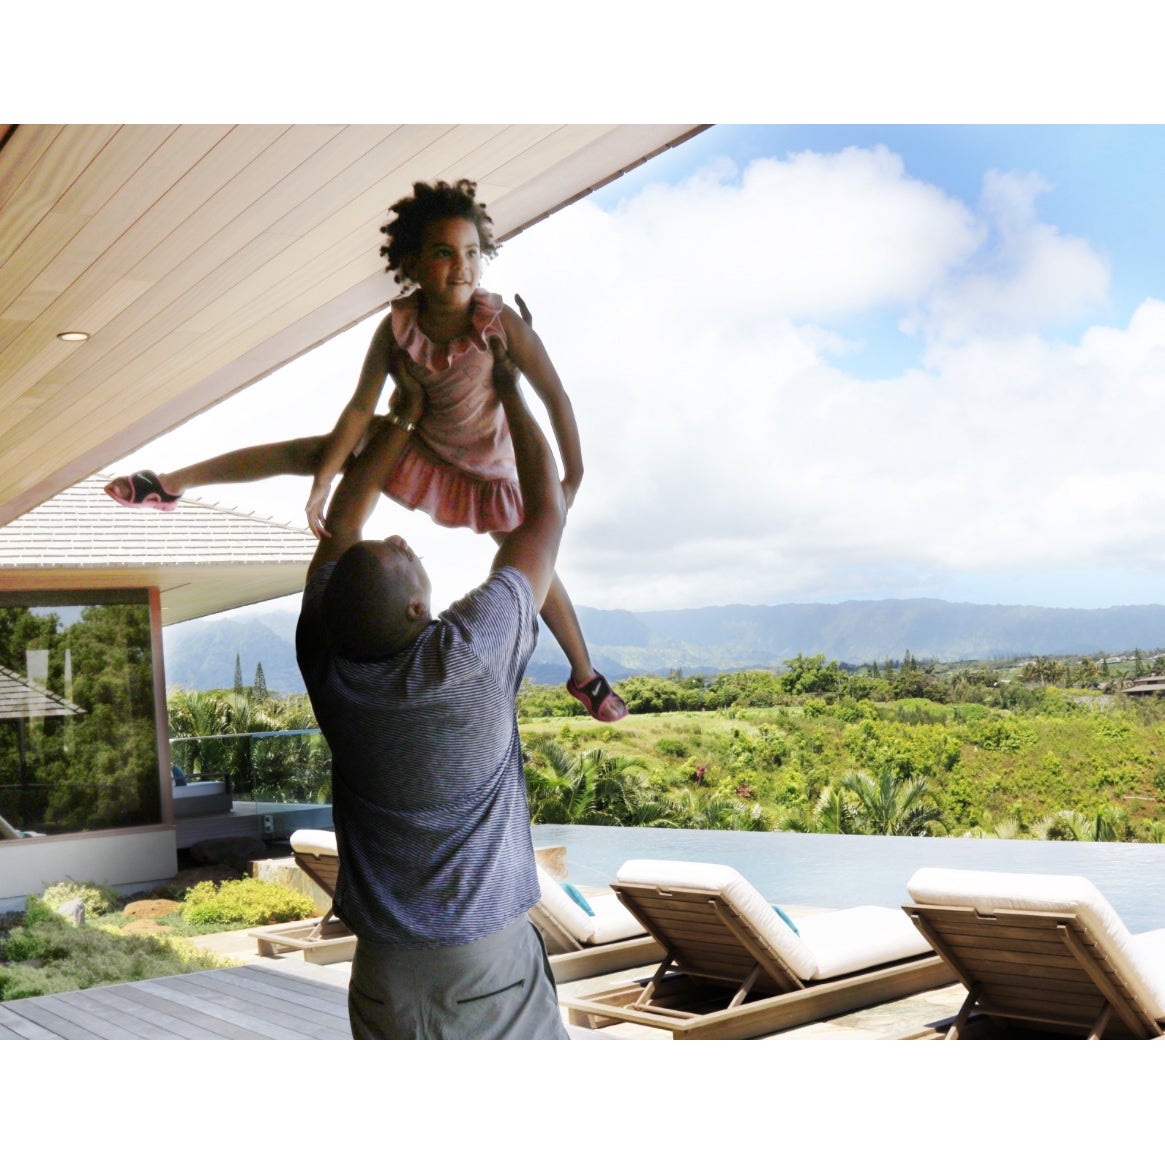 18 Times Beyoncé and Jay Z Basked in Love and Lemonade on Their Hawaiian Vacation
